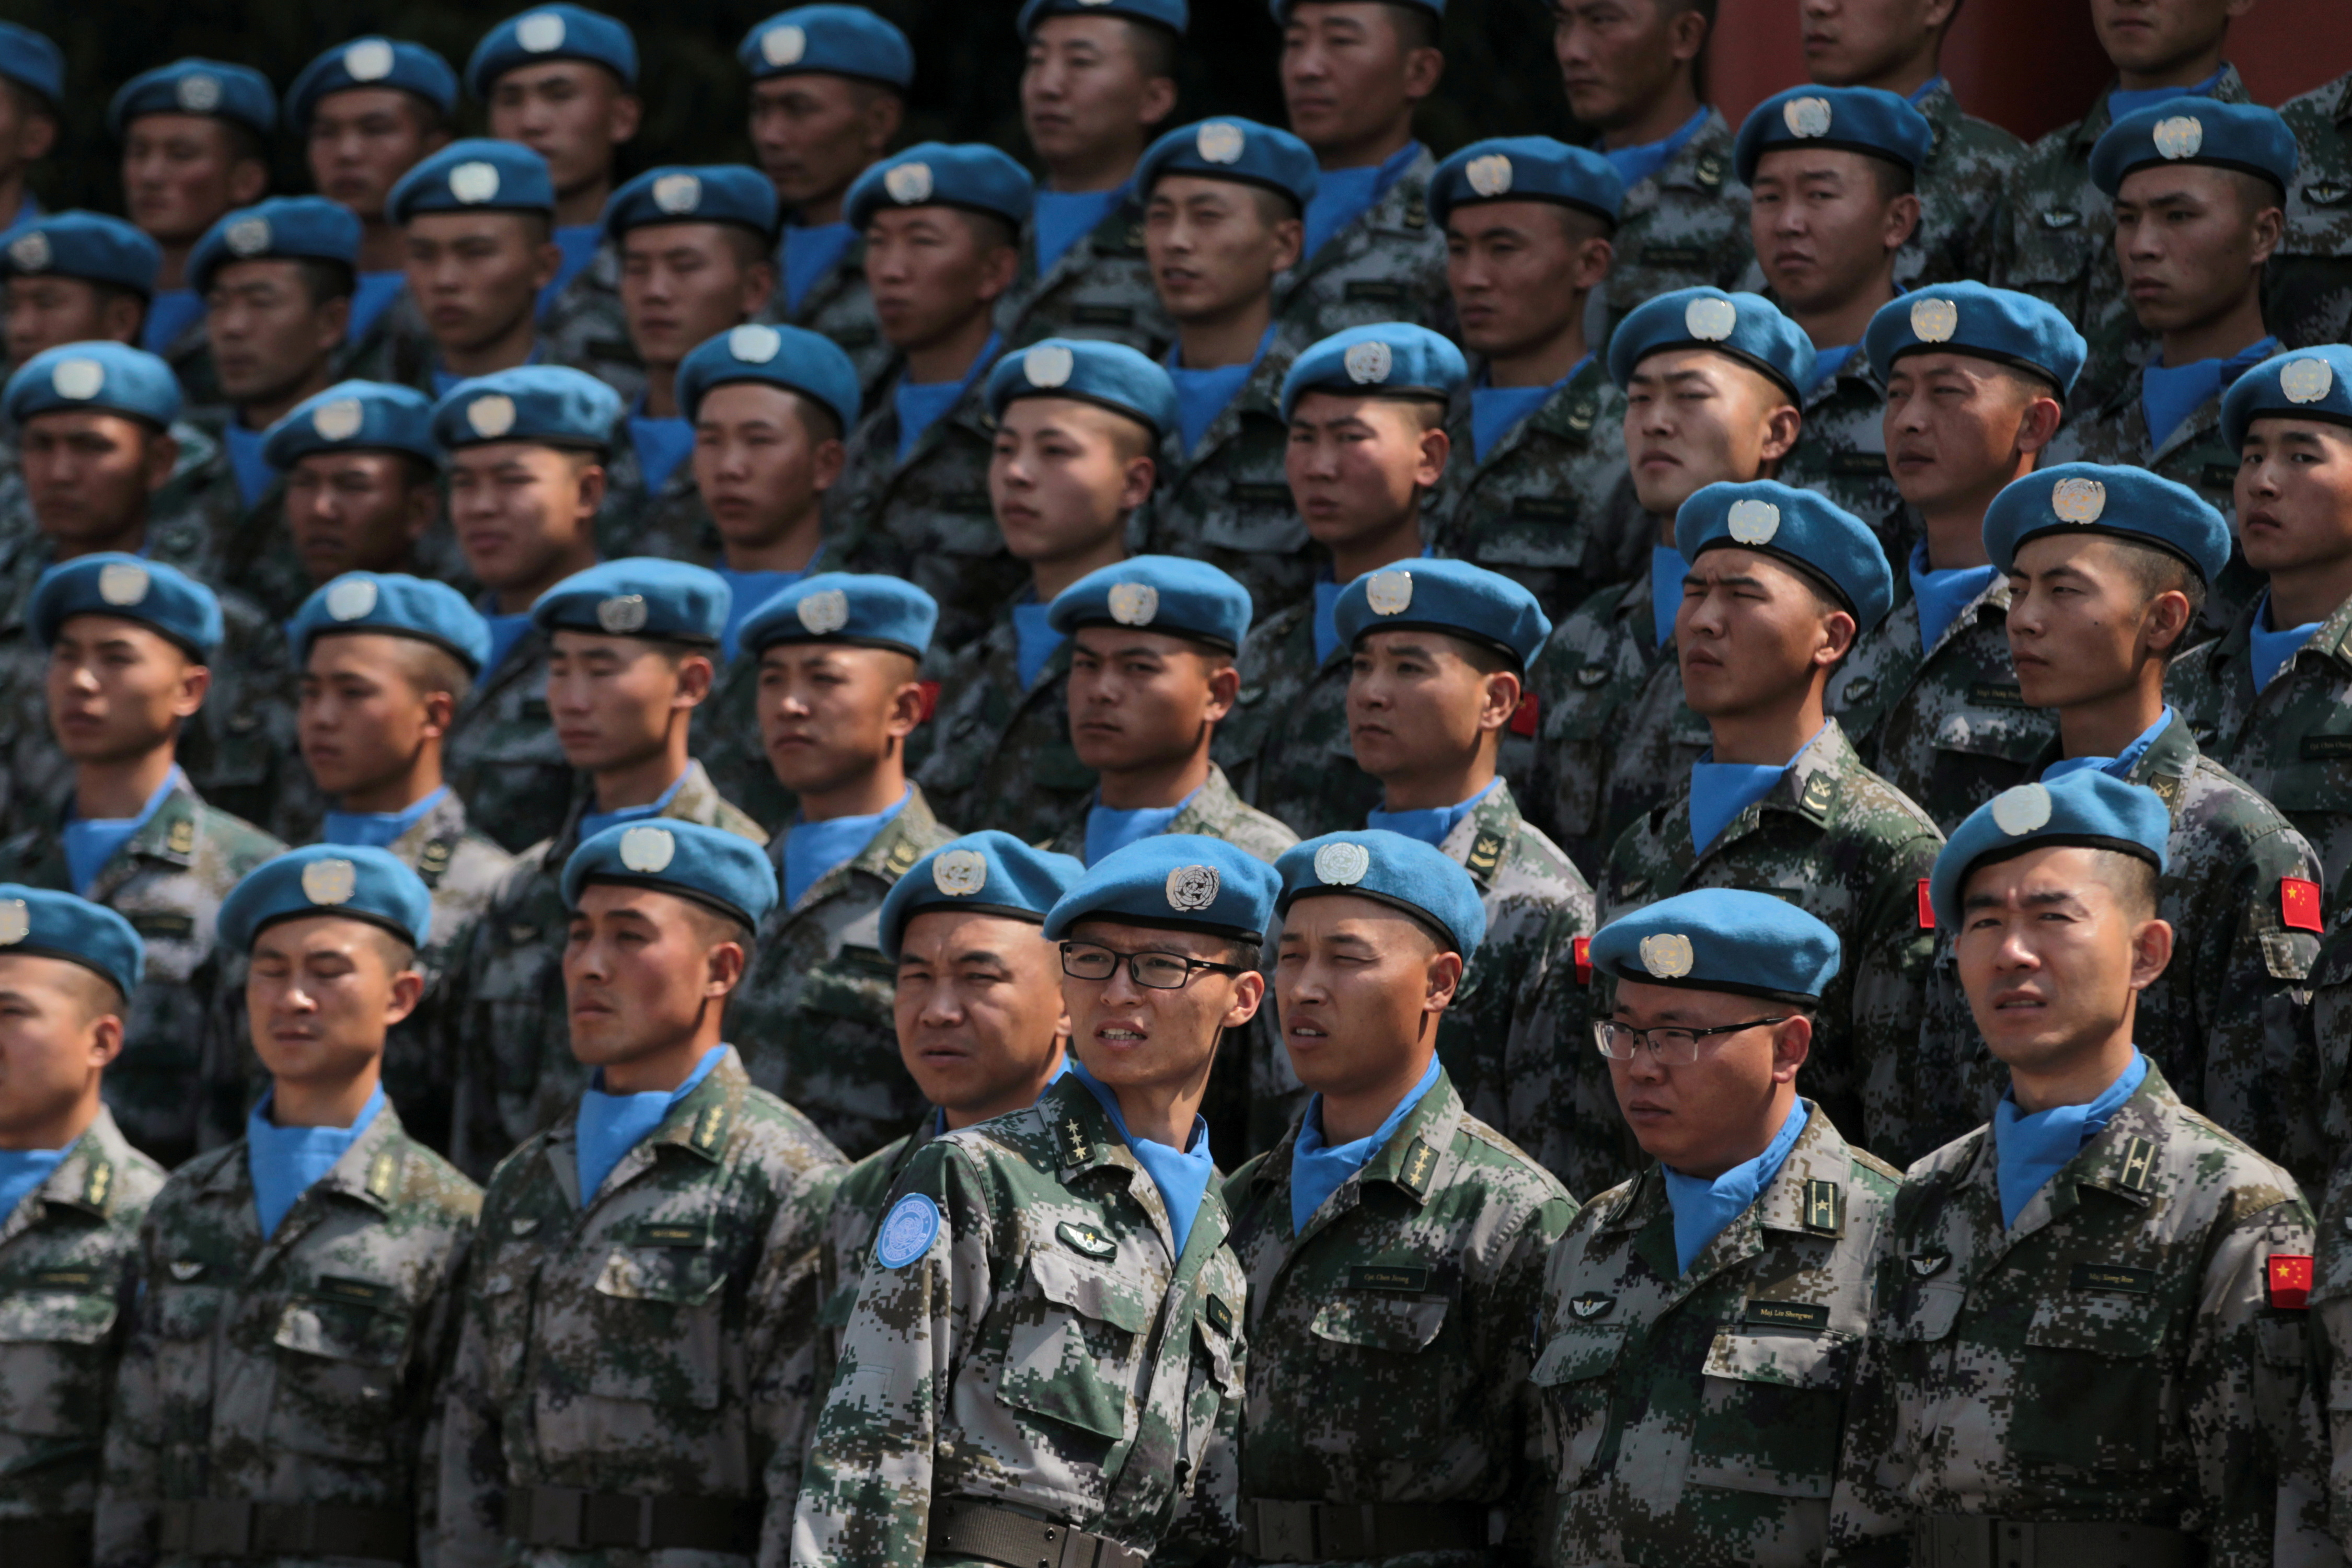 Peacekeeping - Department of Foreign Affairs and Trade